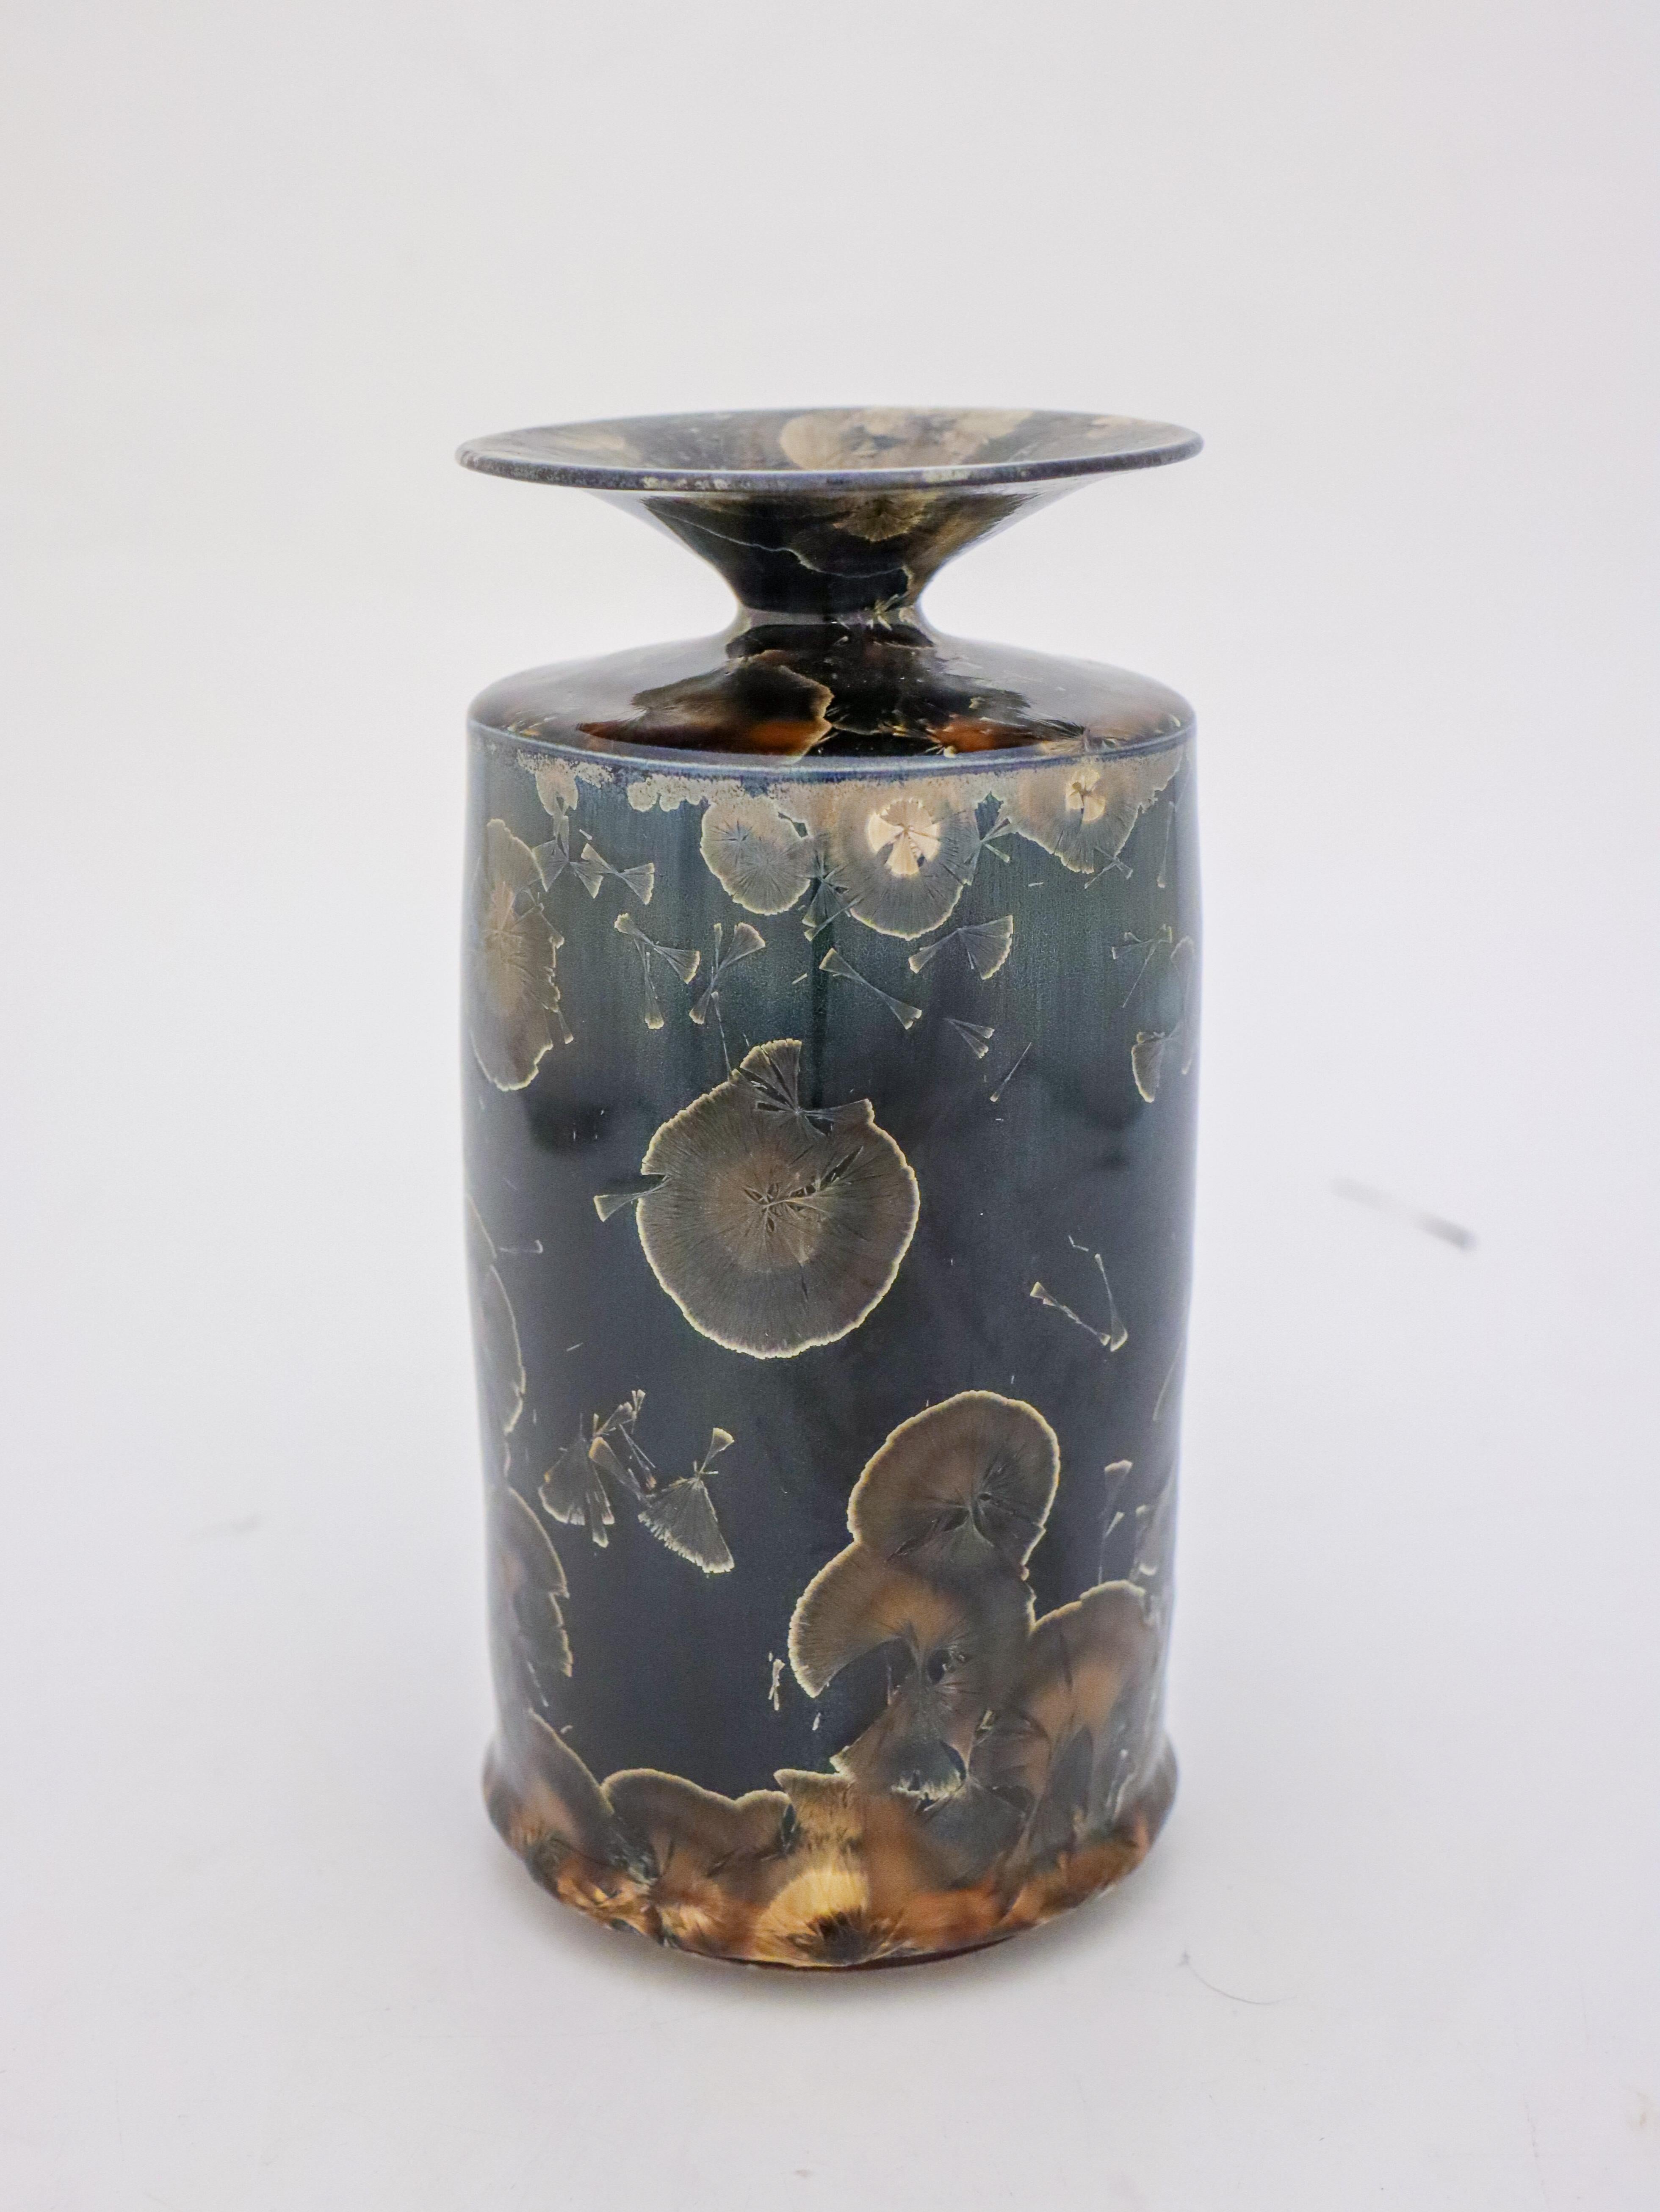 A unique vase in a dark blue color with a brown/silver crystalline glaze created by the contemporary Swedish artist Isak Isaksson in his own studio. The vase is 20 cm (8